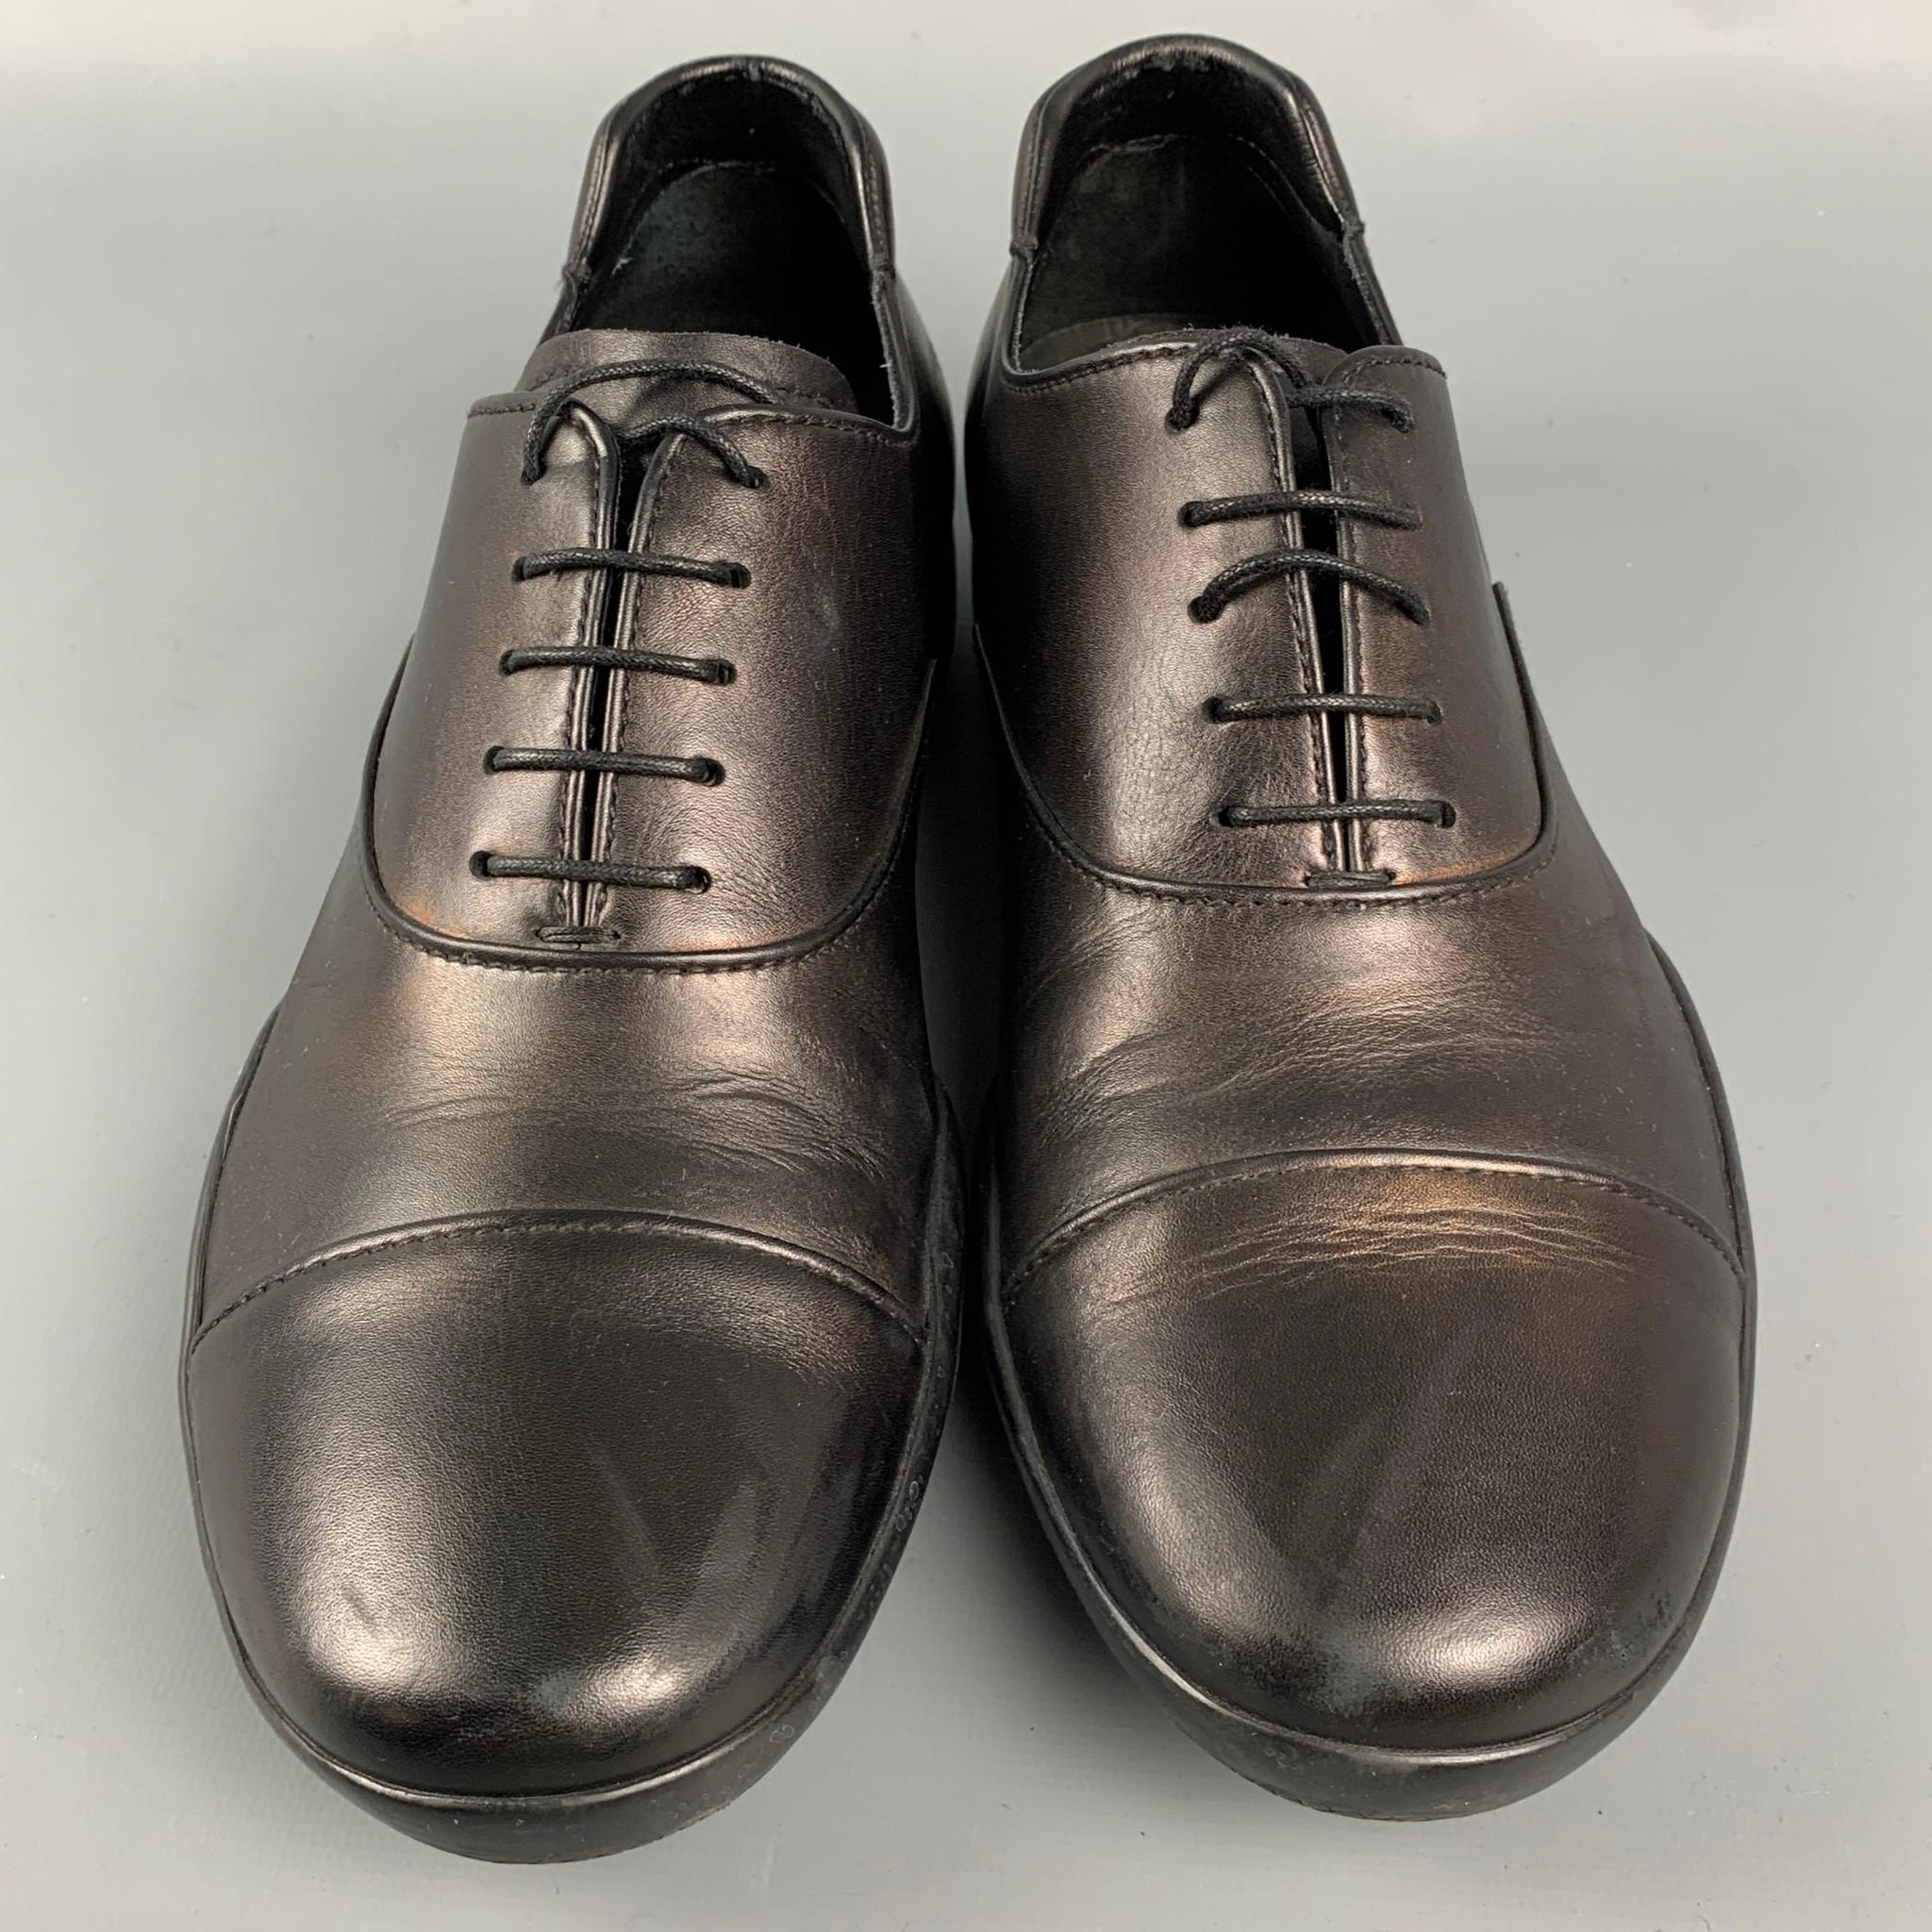 PRADA SPORT shoes comes in a black leather featuring a cap toe. rubber sole, and a lace up closure. 

Very Good Pre-Owned Condition.
Marked: 4 E 0770 5.5

Outsole: 10.5 in. x 4 in. 